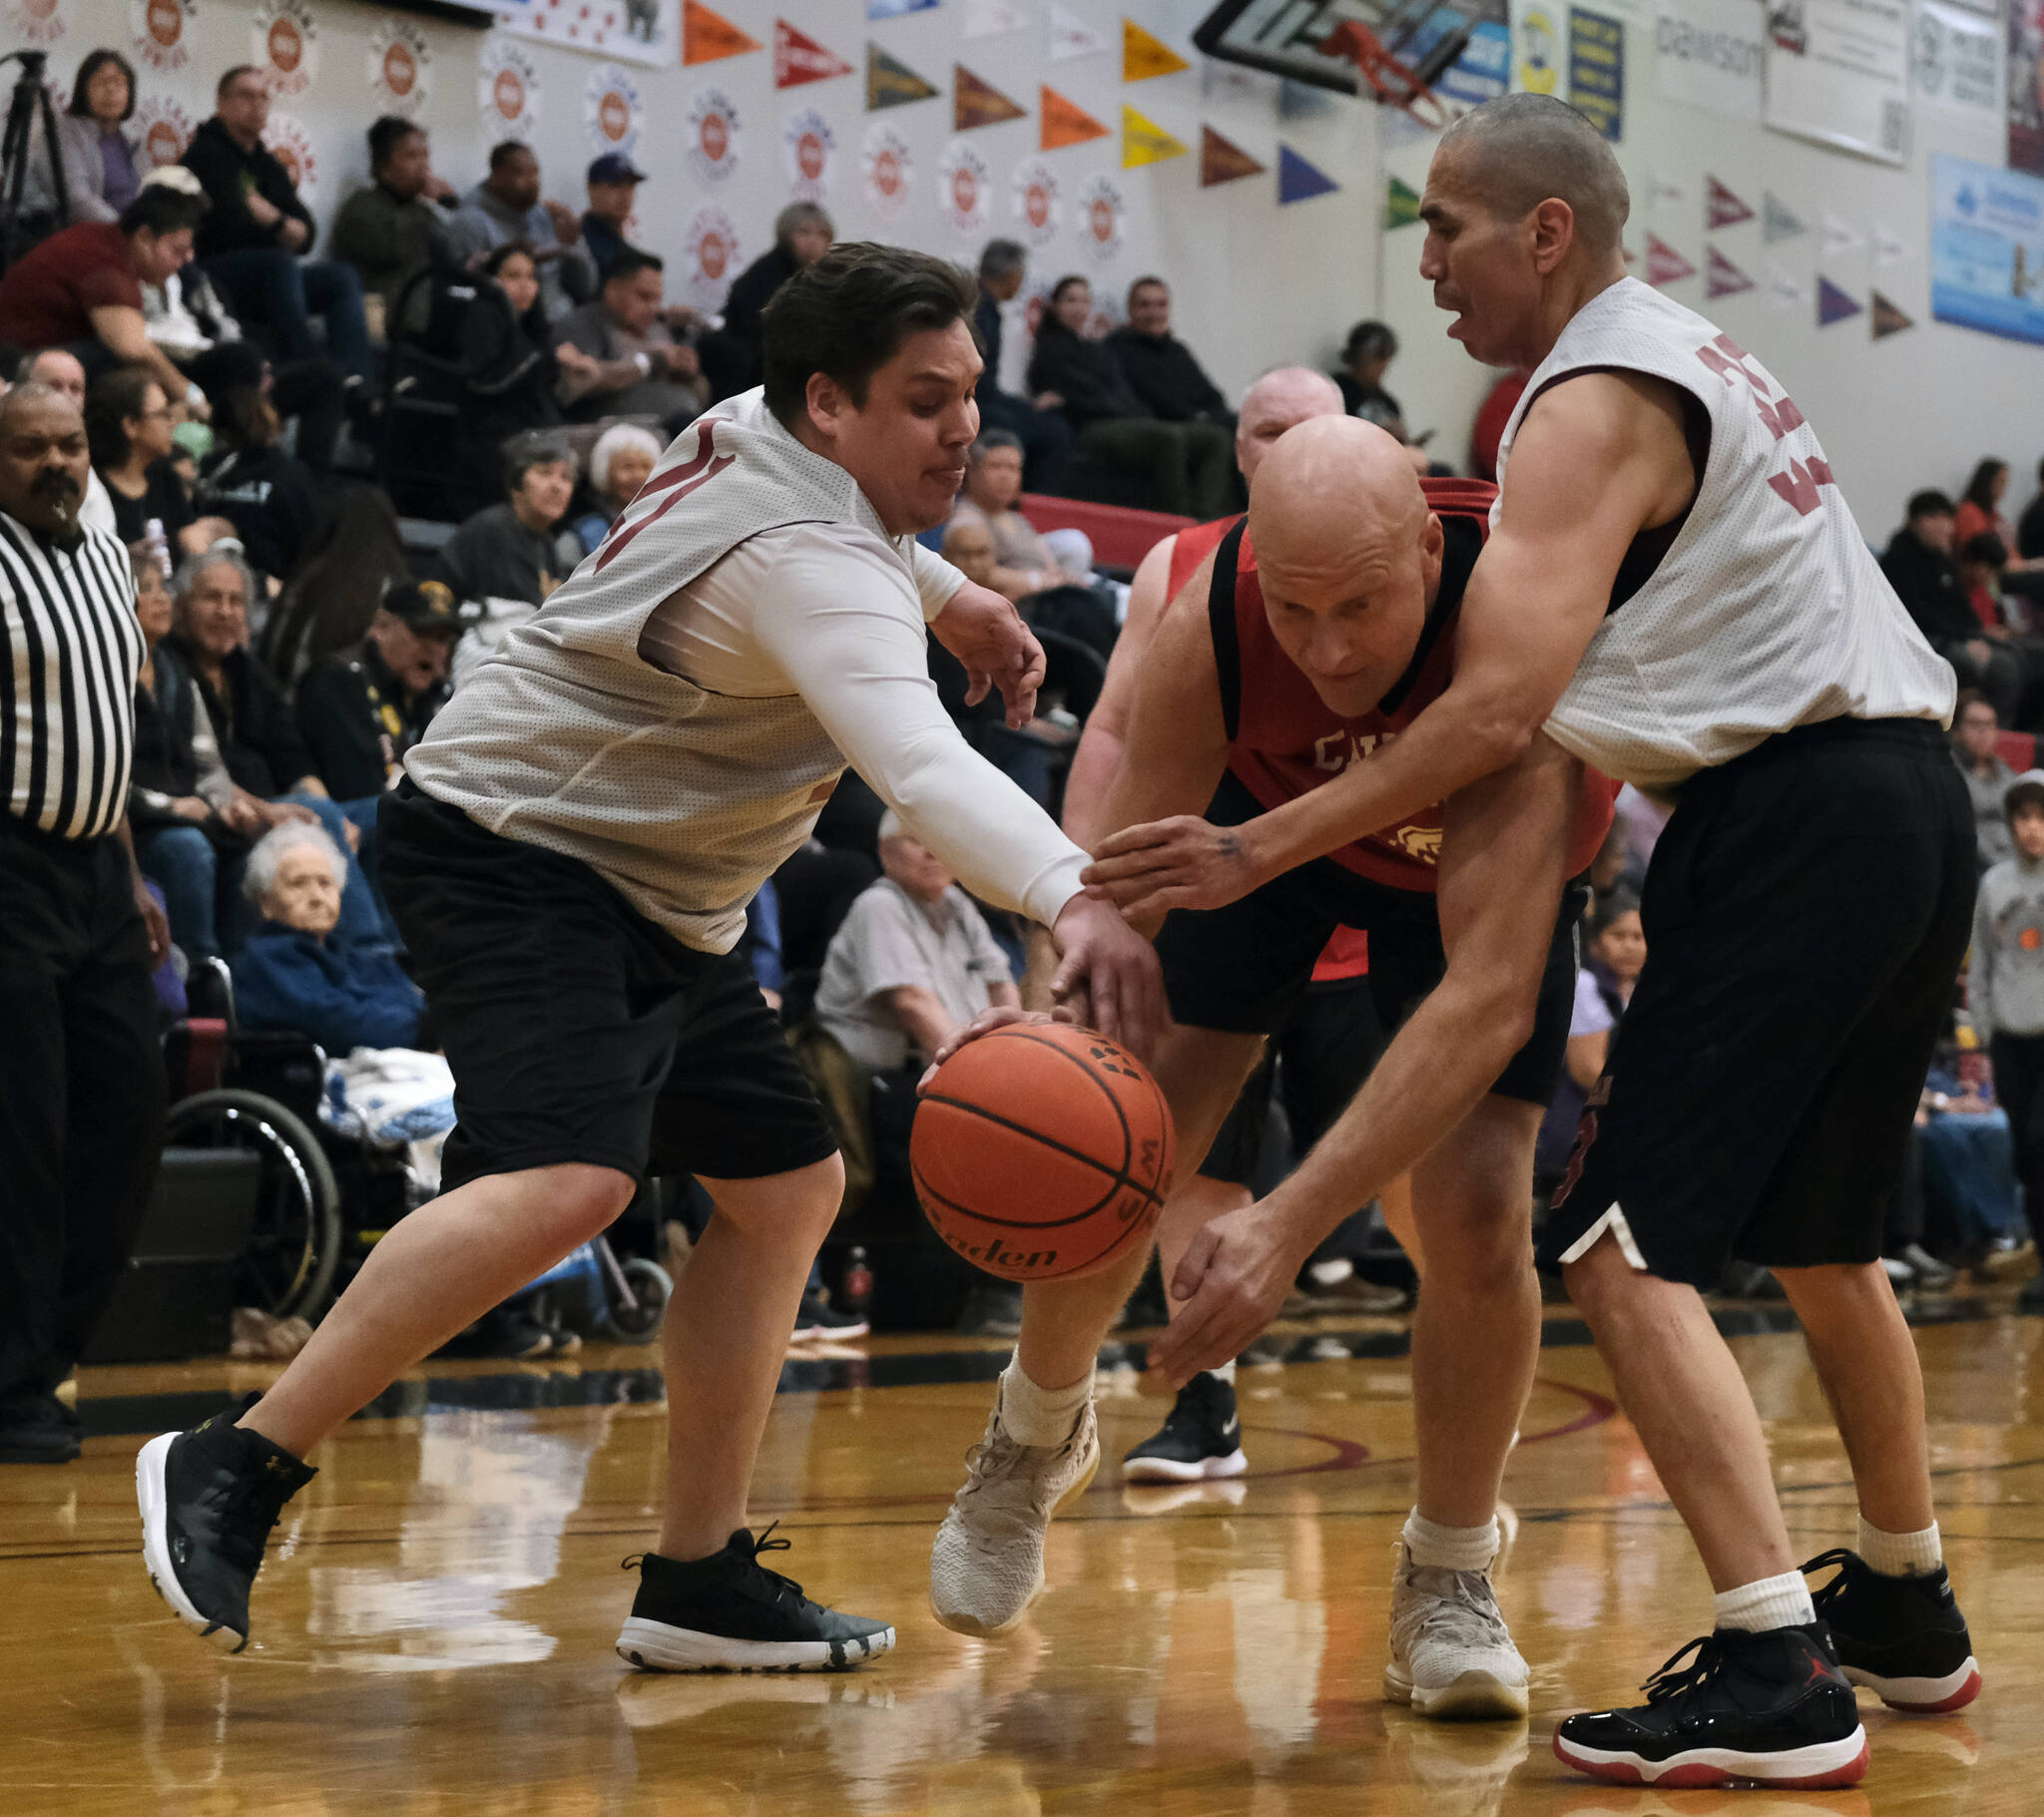 Hoonah’s Adam Lee (21) and Louie White Jr. (35) strip a ball from Klukwan’s Jeff Sharnbroich during Masters Bracket action in the Gold Medal Basketball Tournament, Monday, March 20, at Juneau-Douglas High School: Yadaa.at Kalé. (Klas Stolpe/For the Juneau Empire)